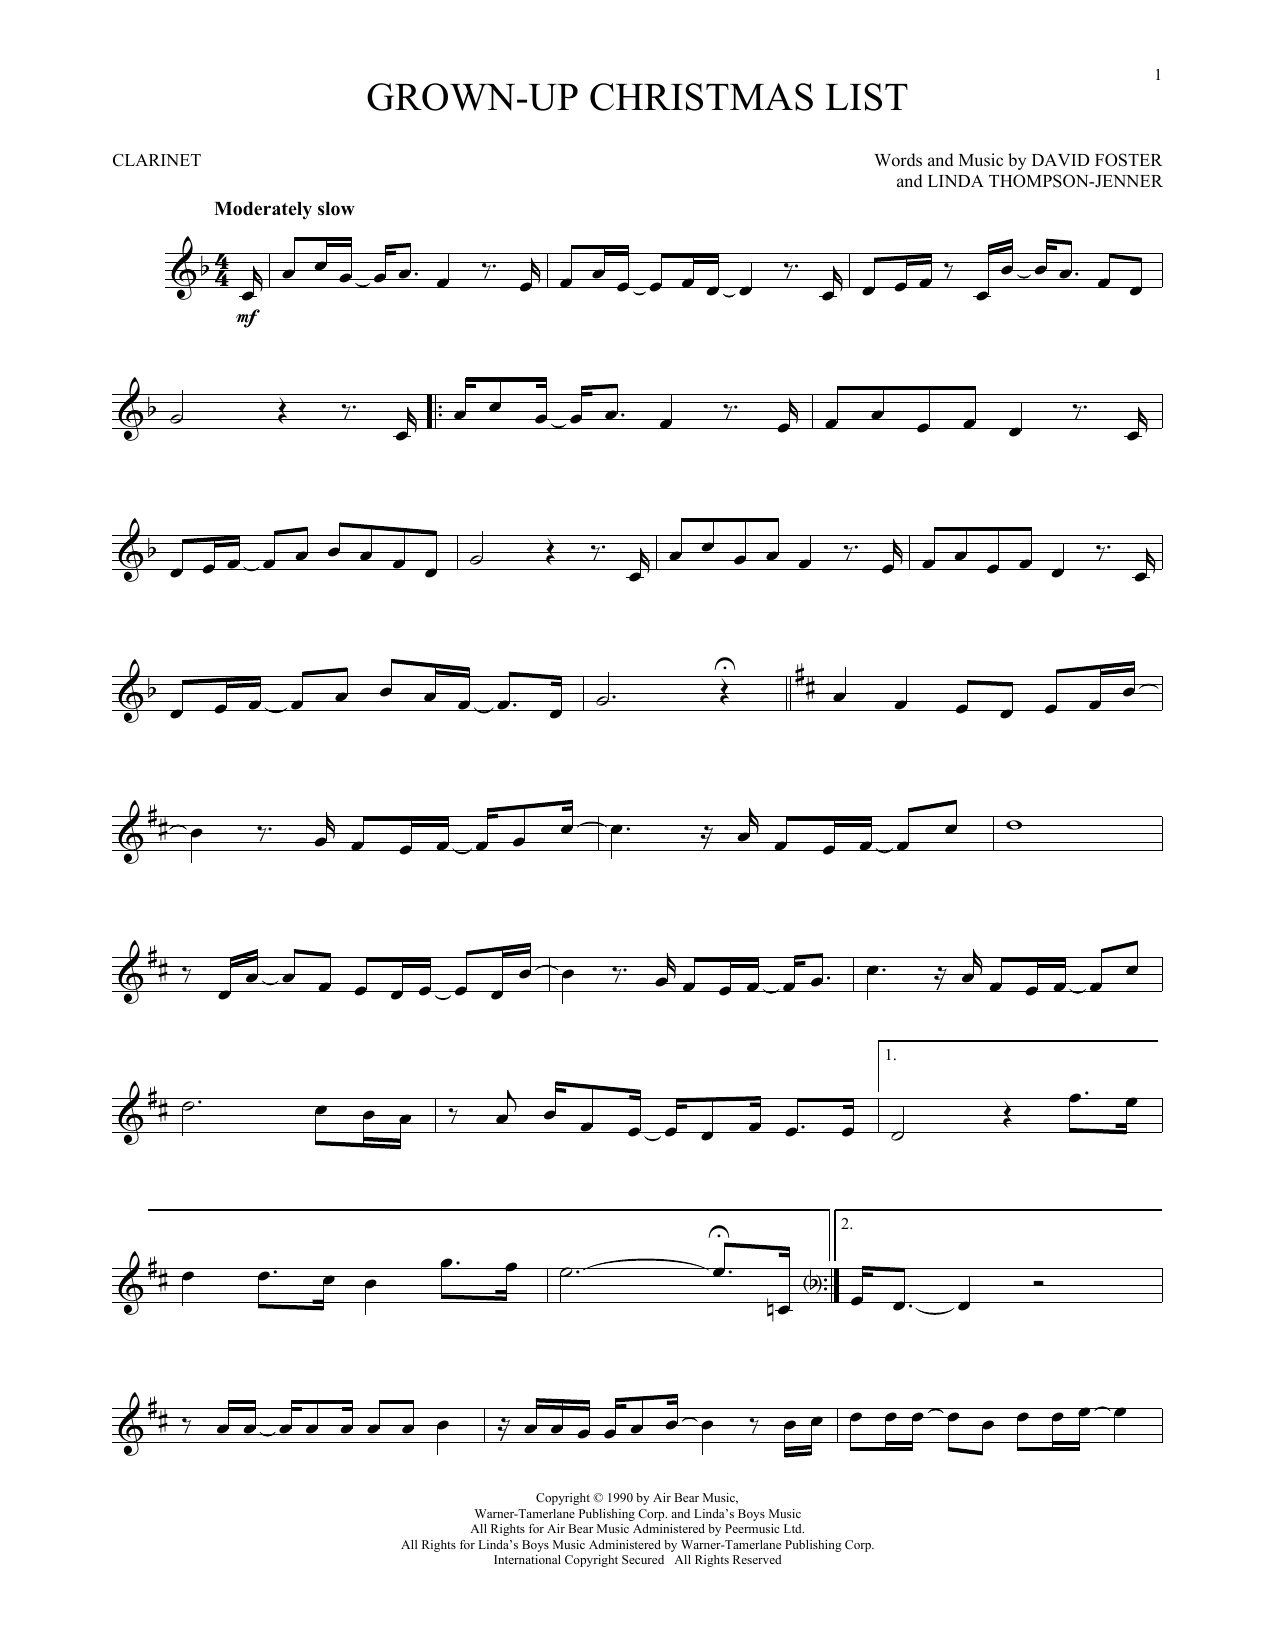 Download Amy Grant Grown-Up Christmas List Sheet Music